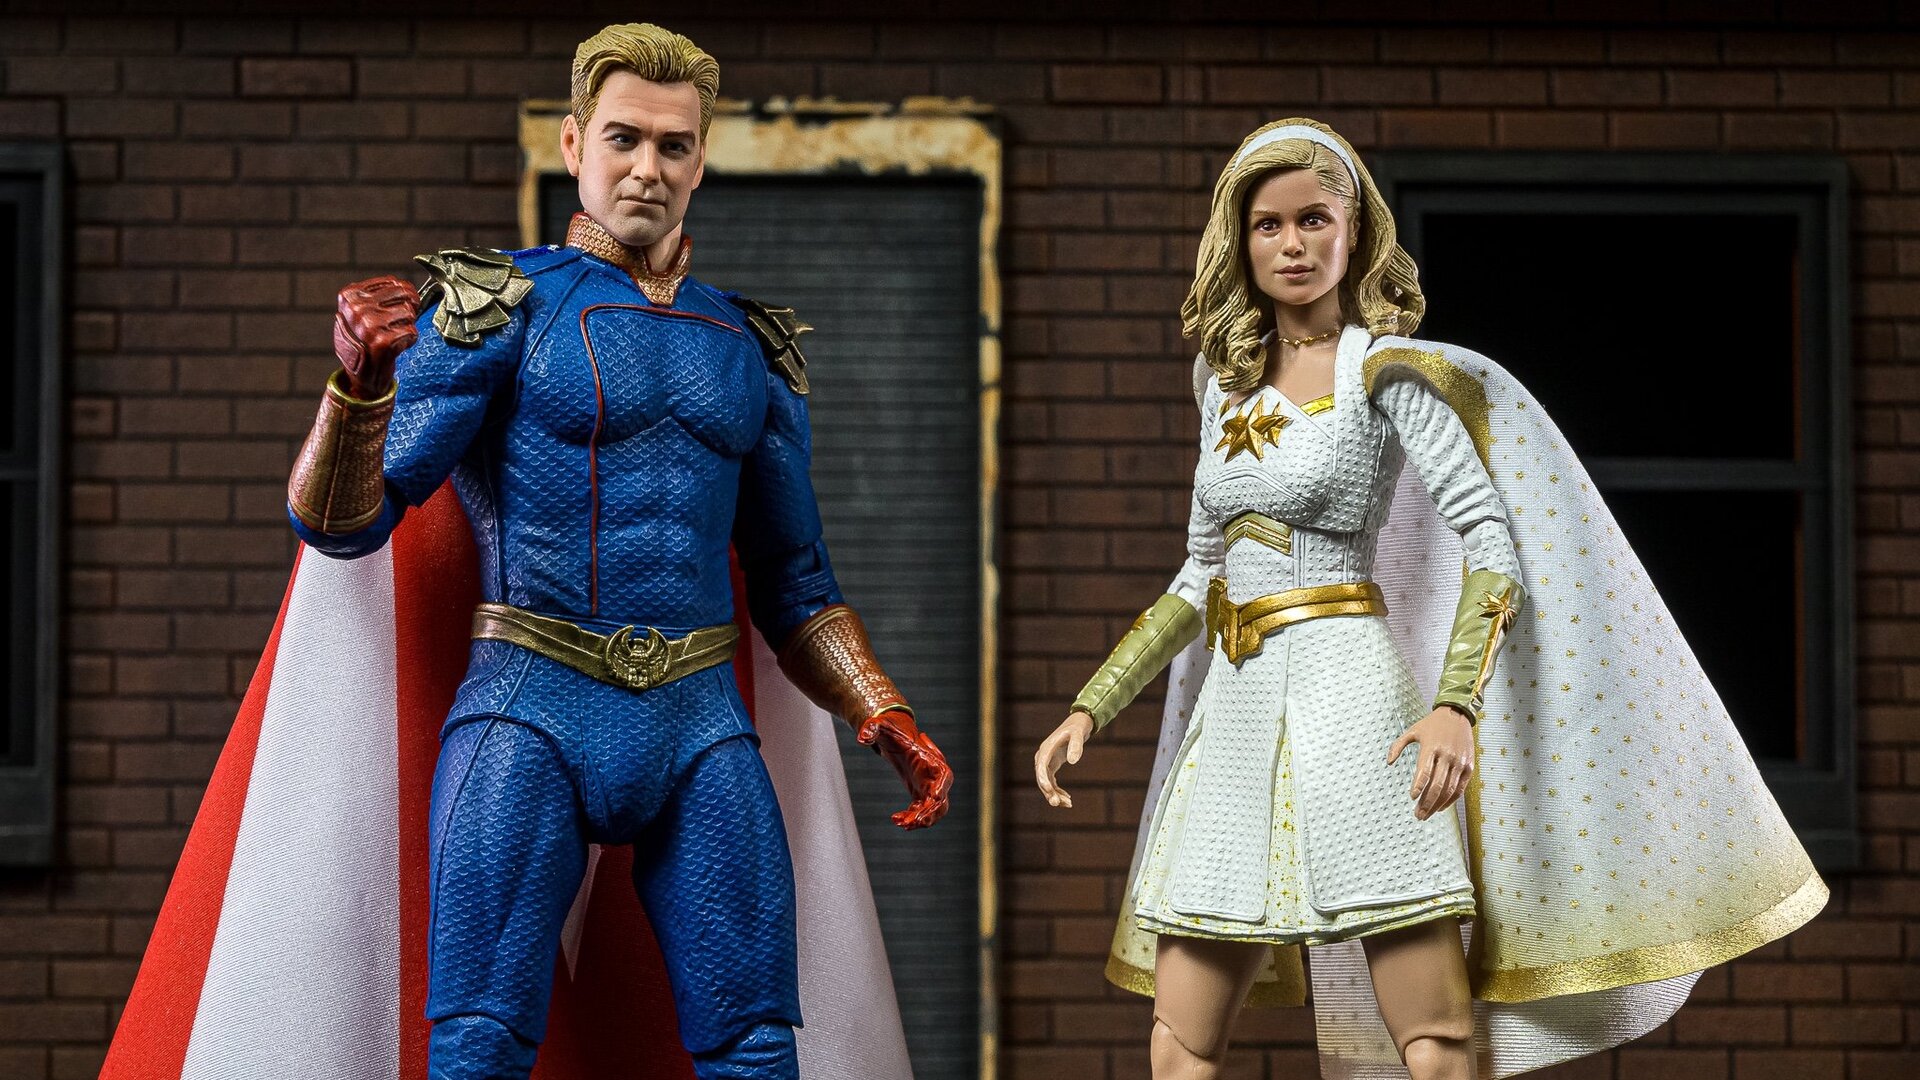 check-out-necas-upcoming-the-boys-action-figures-featuring-homelander-and-starlight.jpg